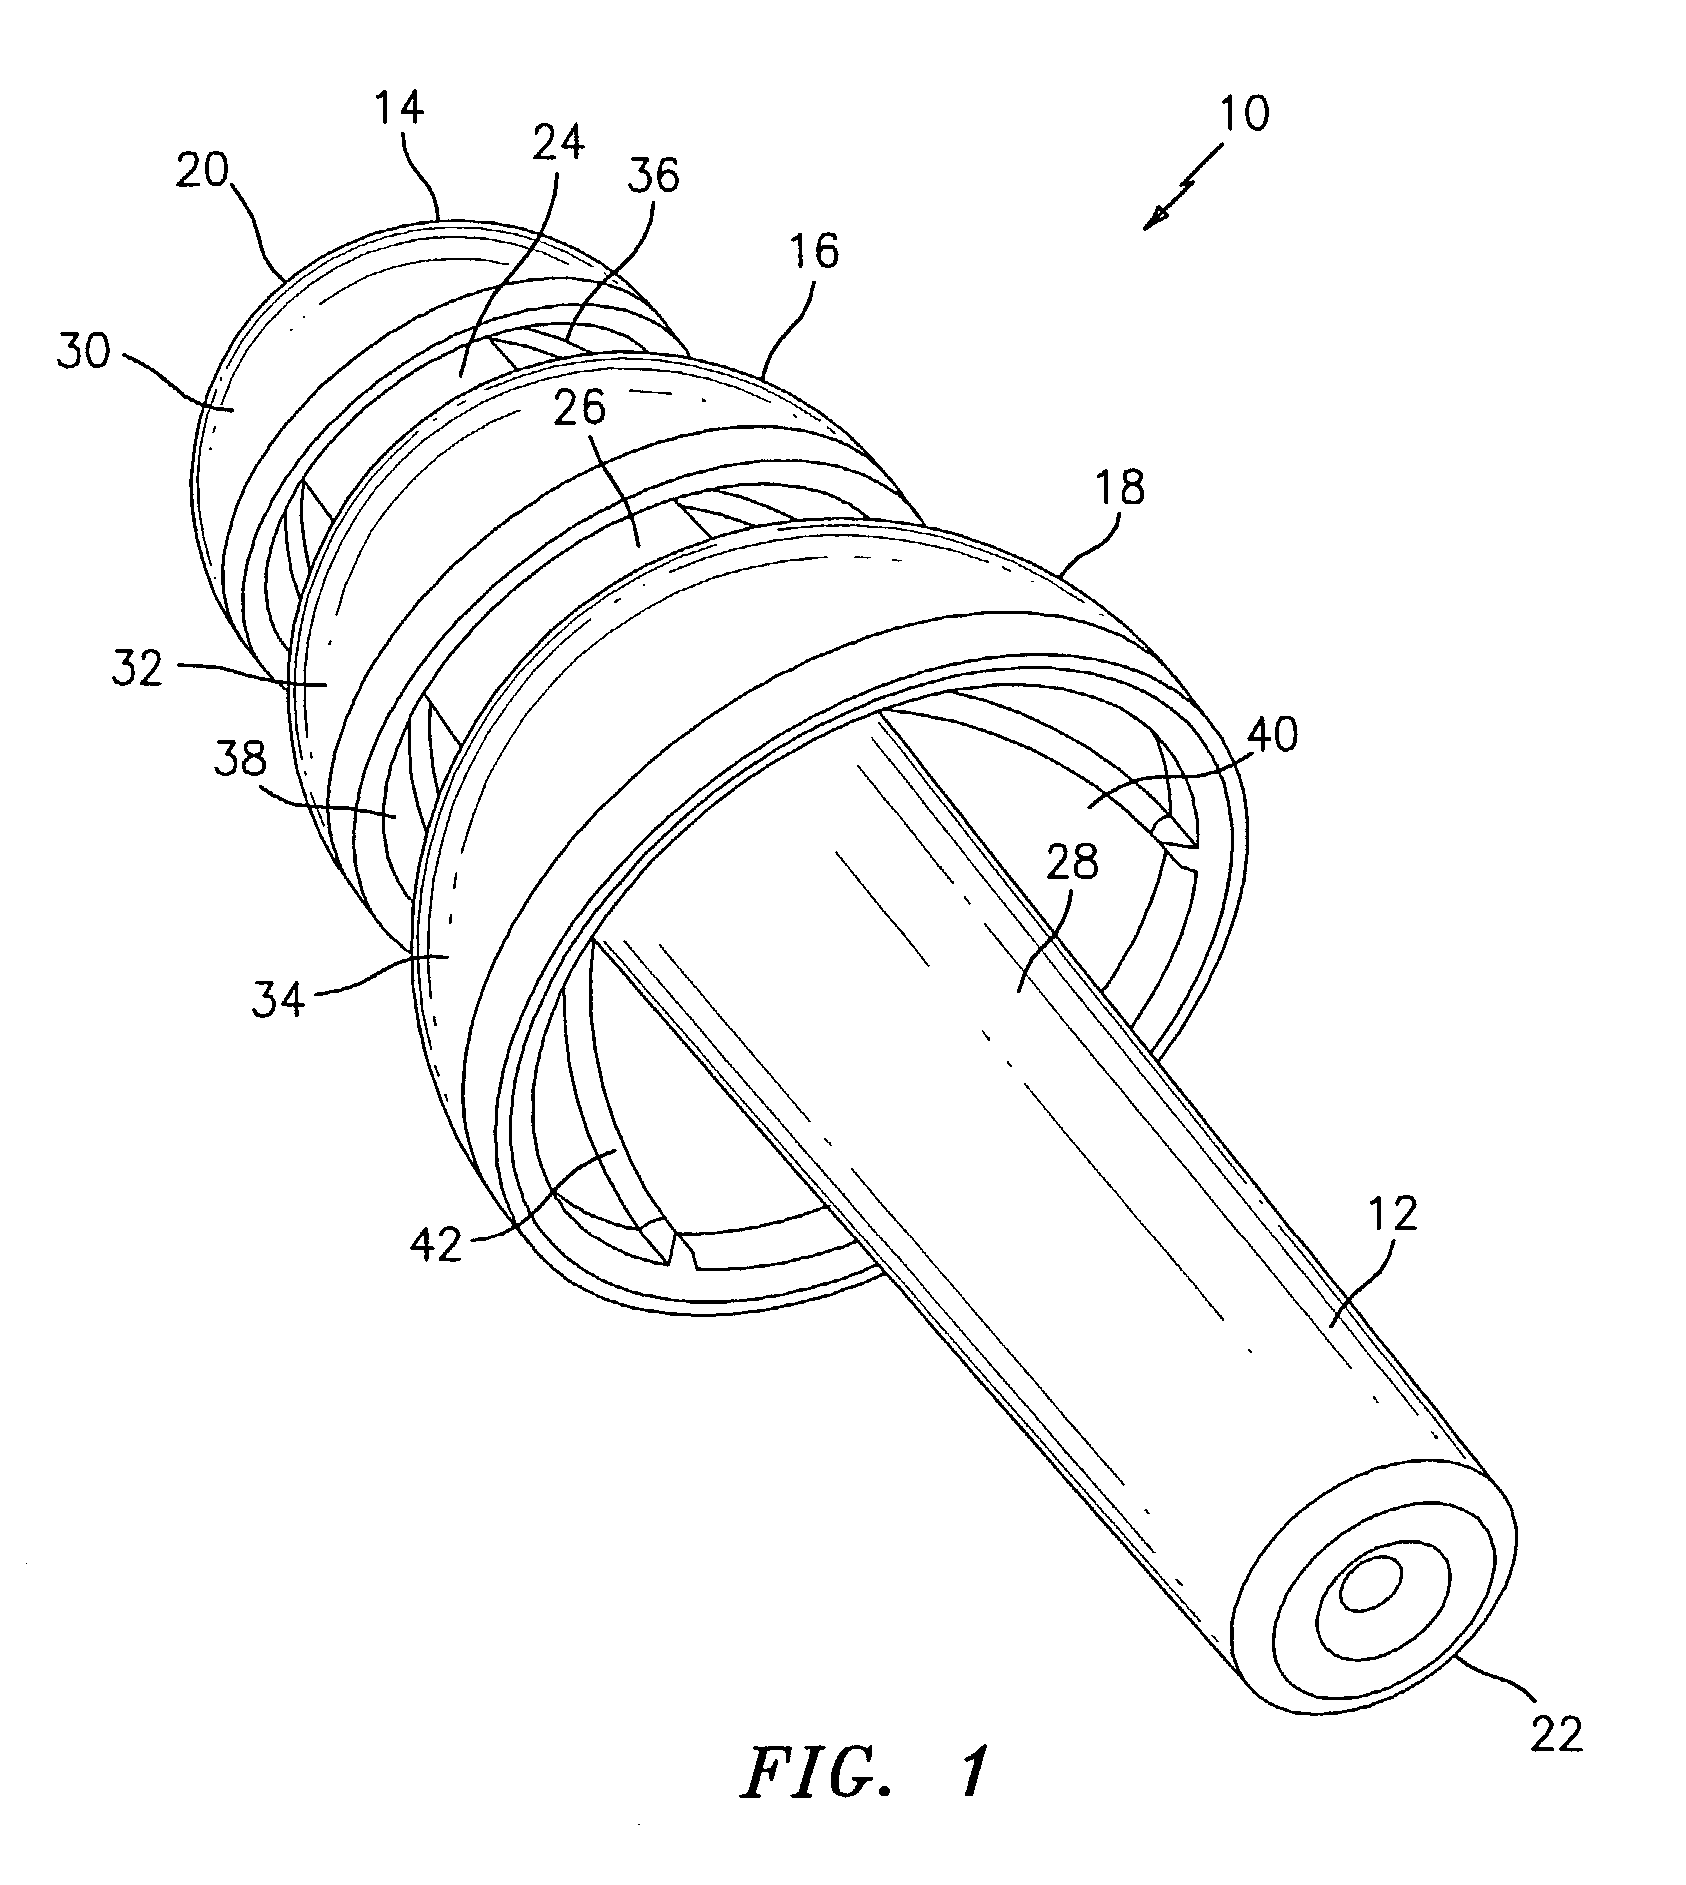 Hearing protection device